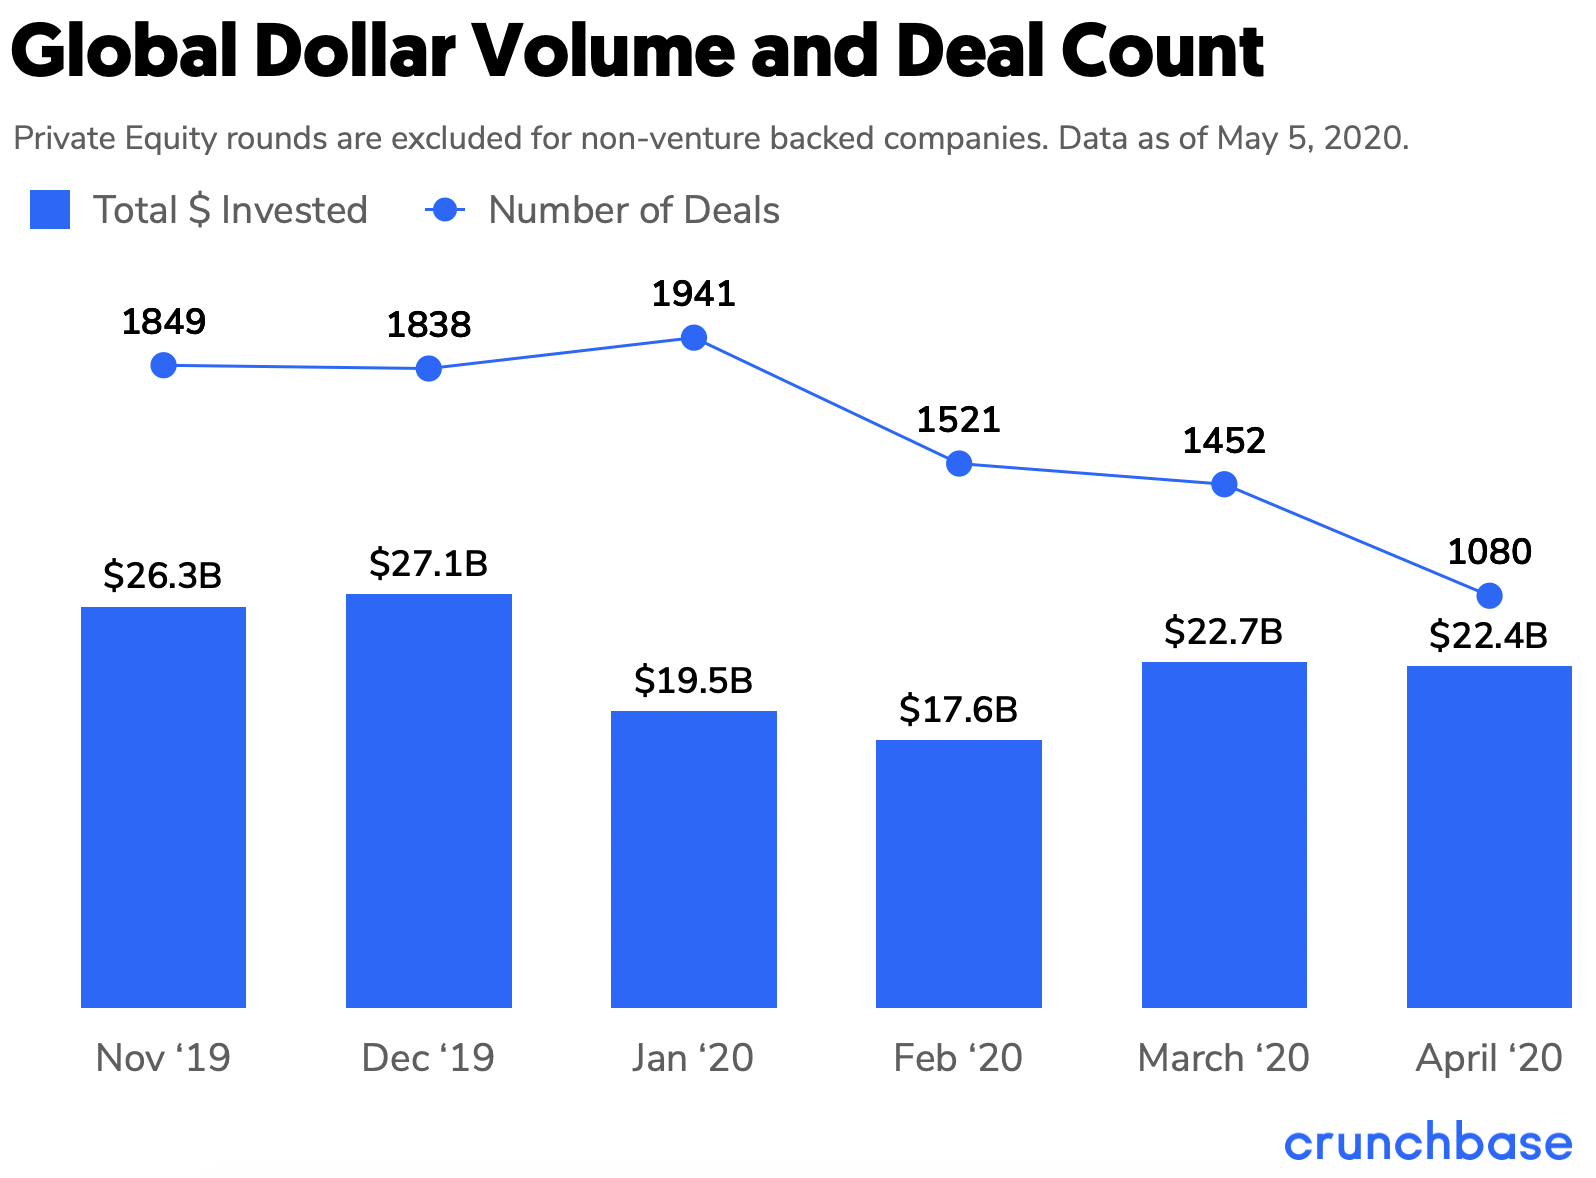 global dollar volume and deal count - Crunchbase monthly rundown